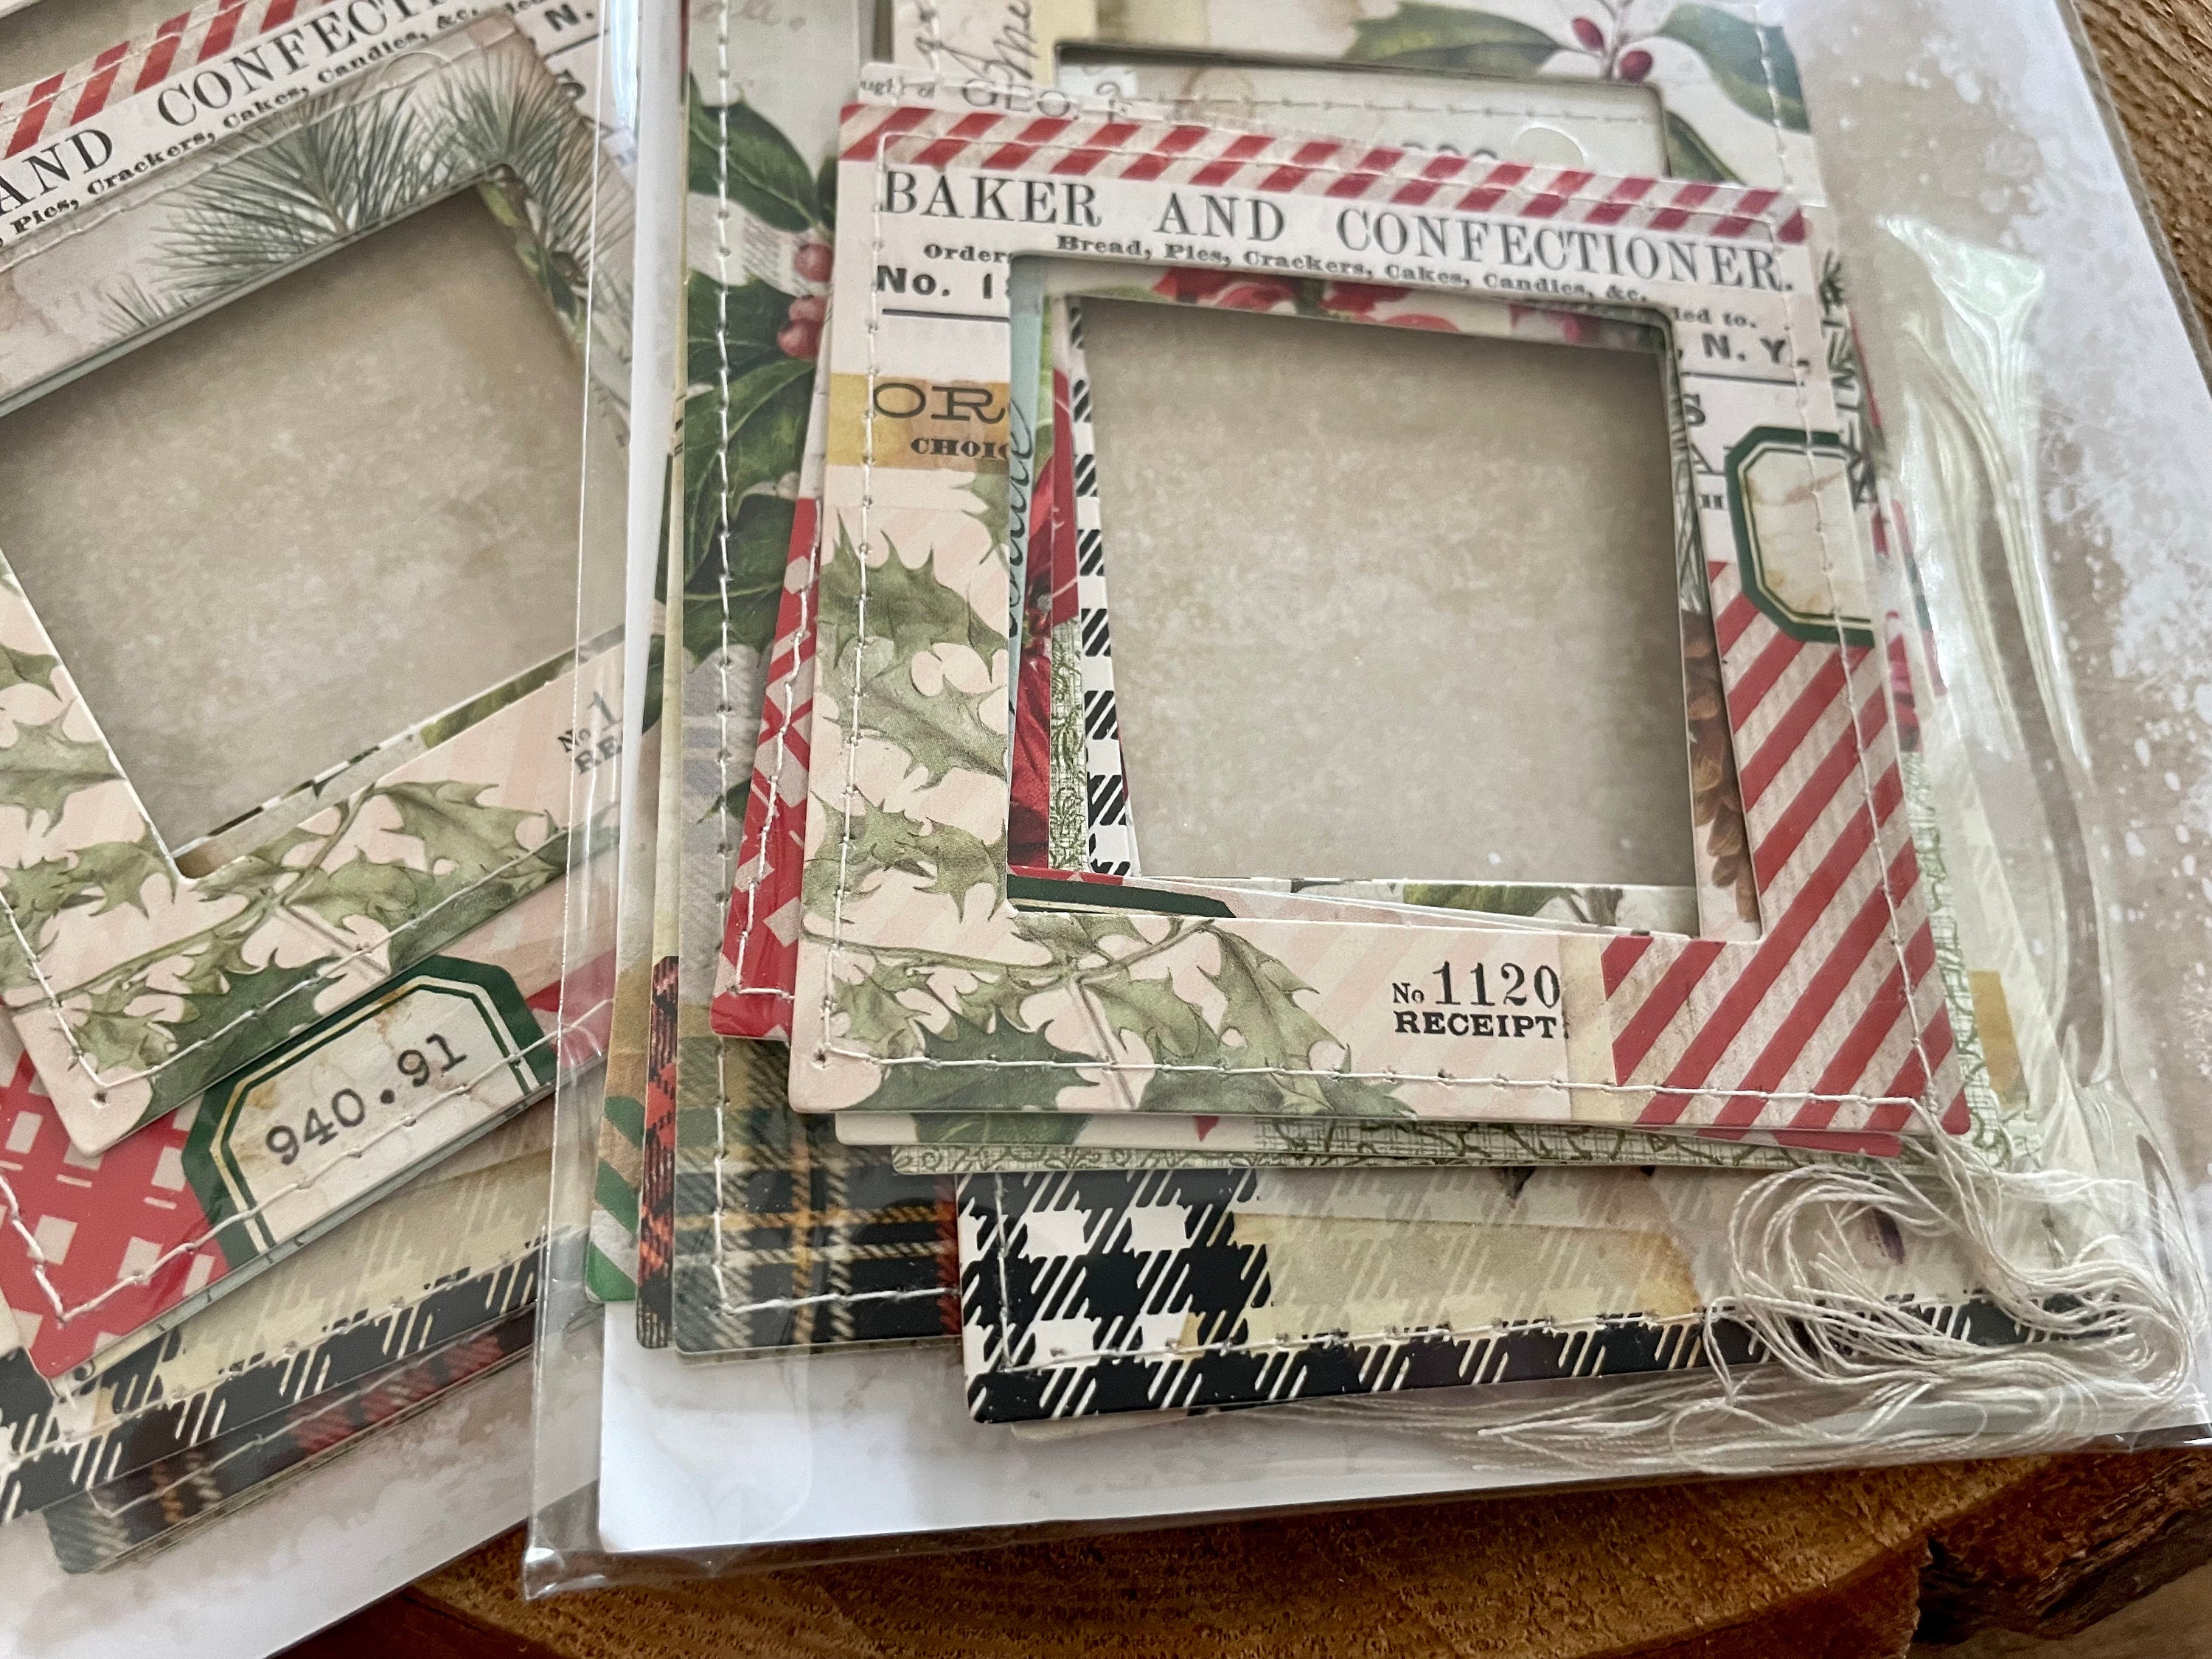 Christmas 2023 Idea-Ology by Tim Holtz - [TH94362] Layer Frames